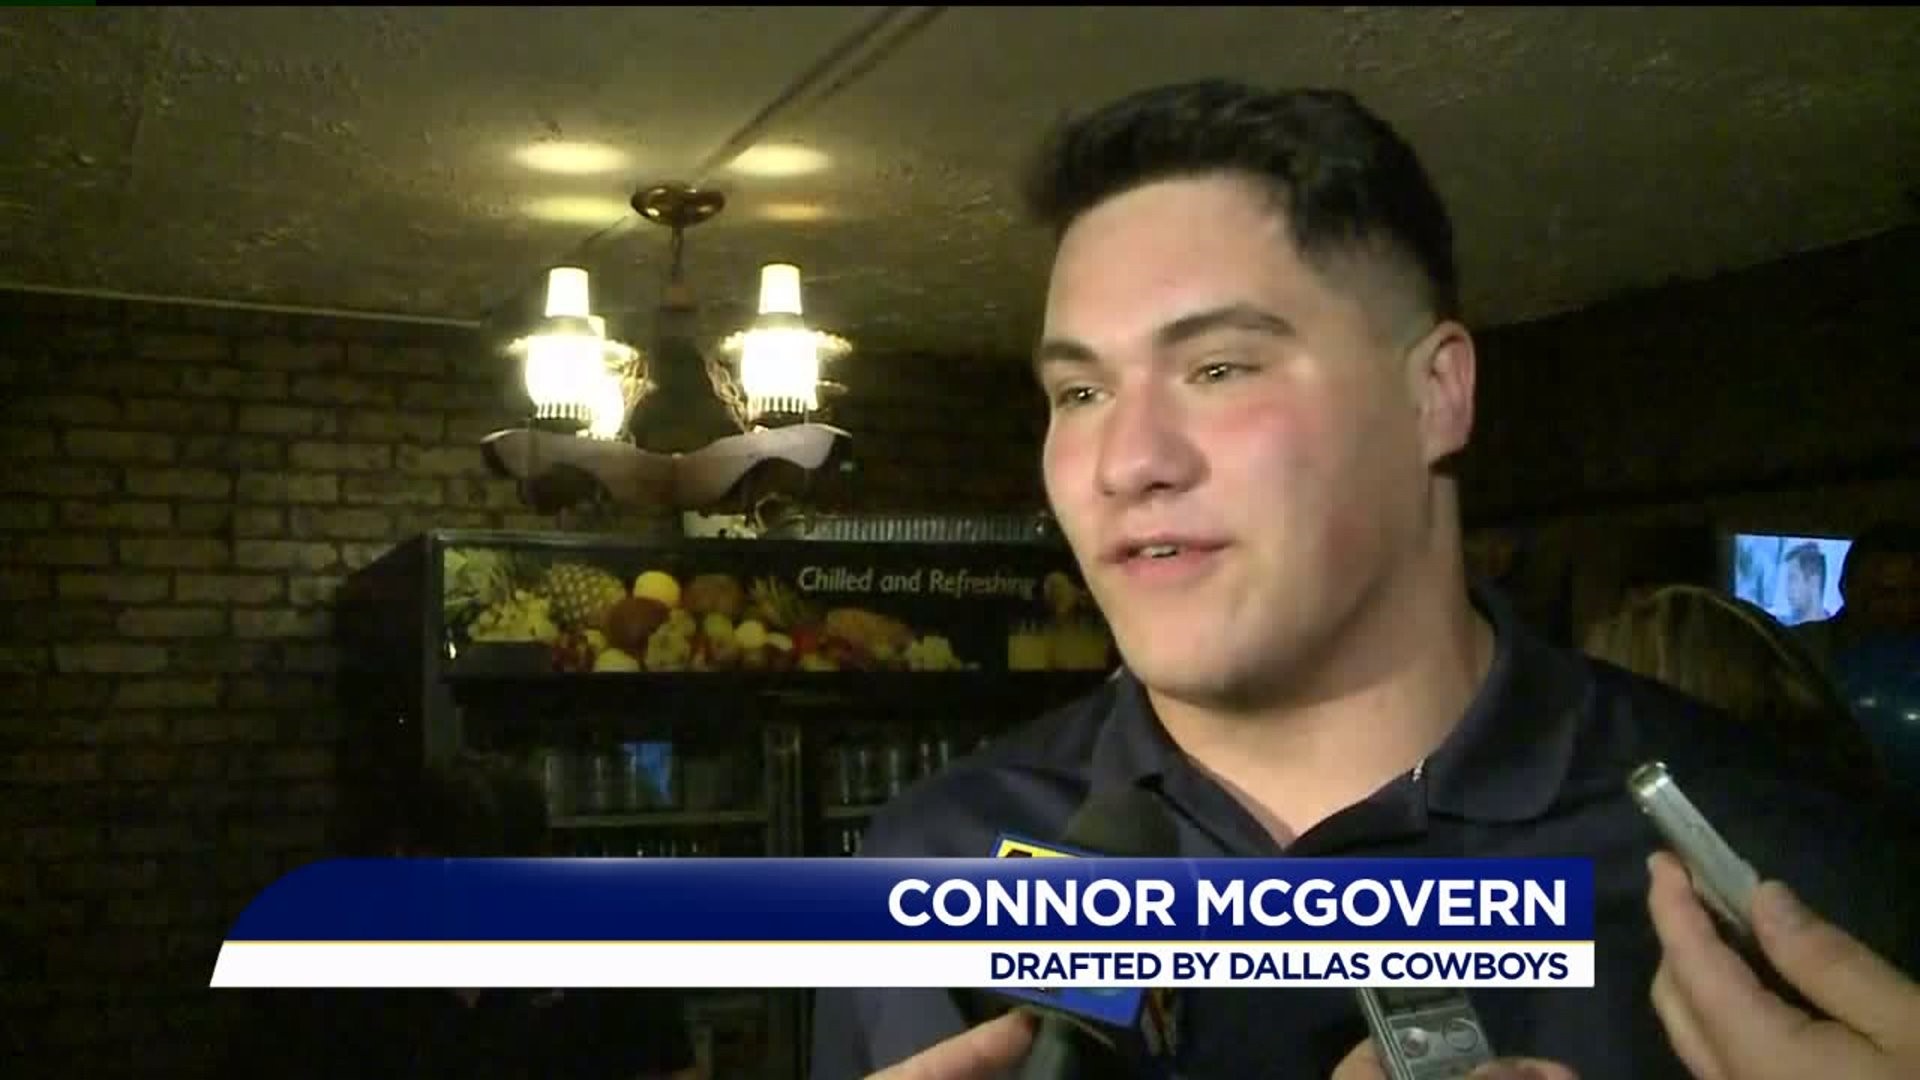 McGovern Drafted by Cowboys